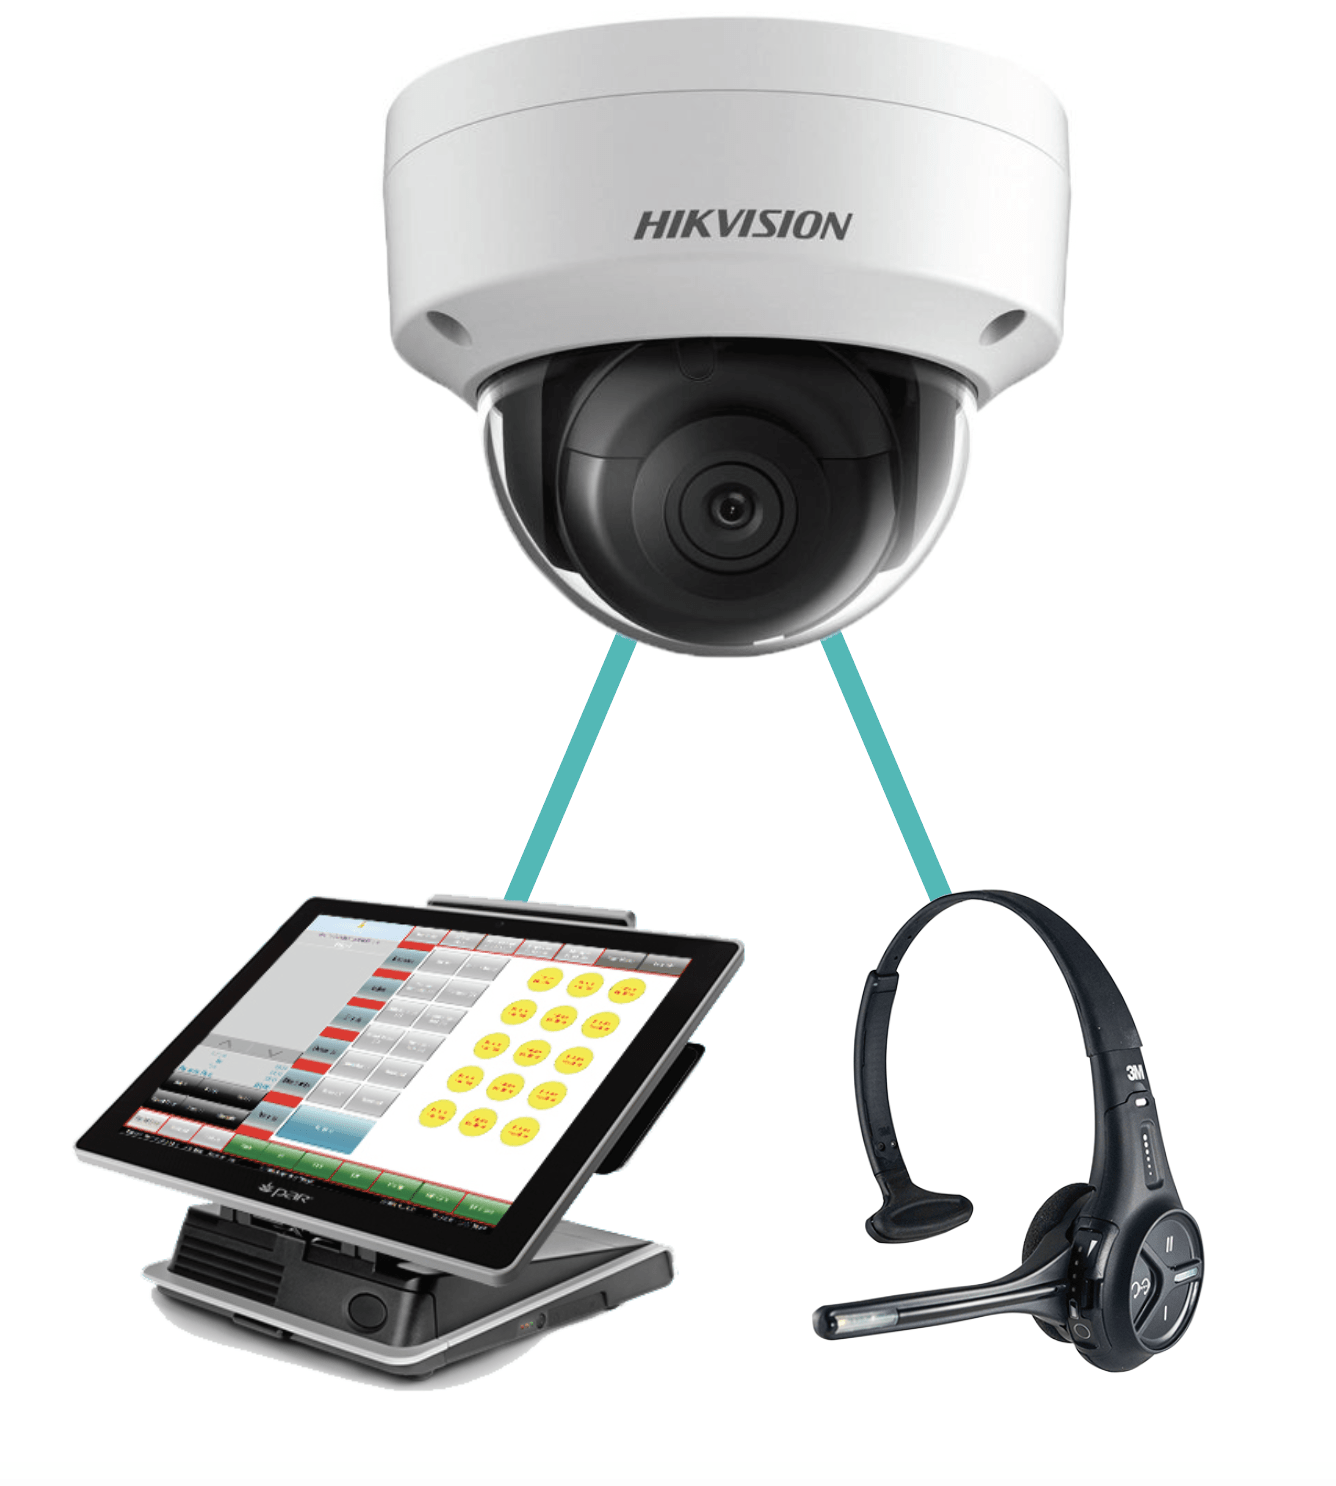 A hikvision cctv system with a headset and a tablet.